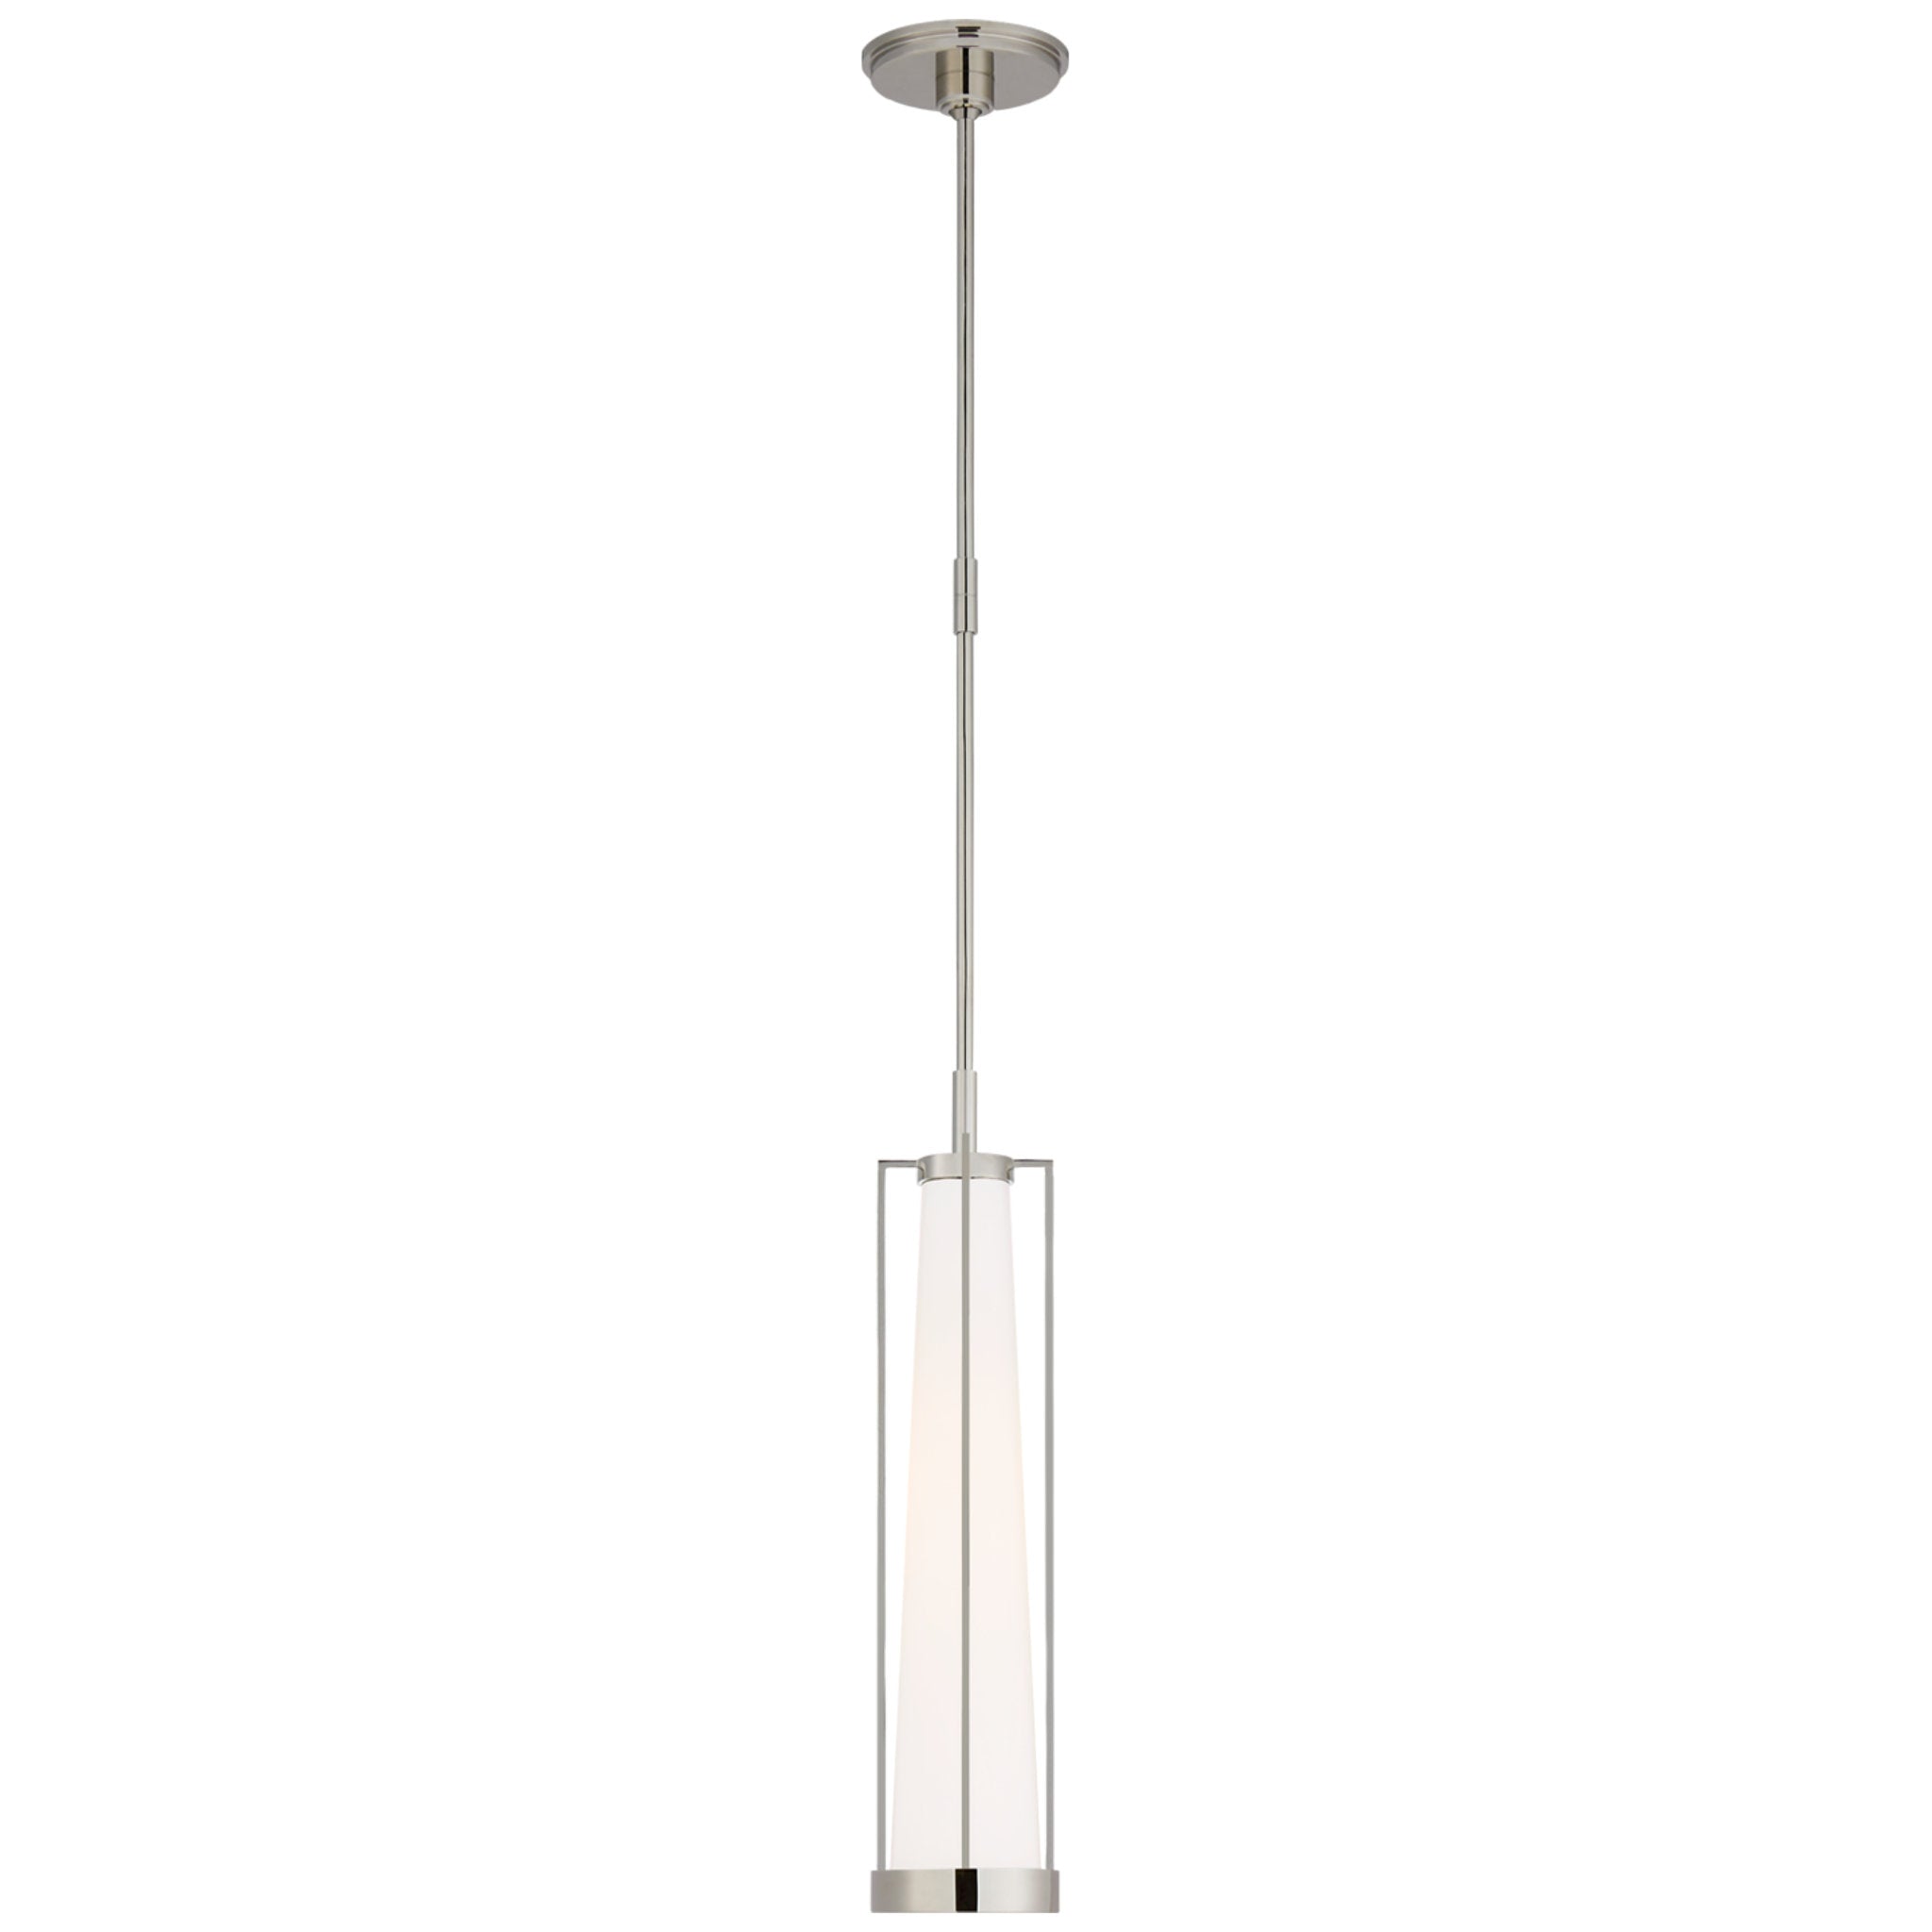 Thomas O'Brien Calix Tall Pendant in Polished Nickel with White Glass